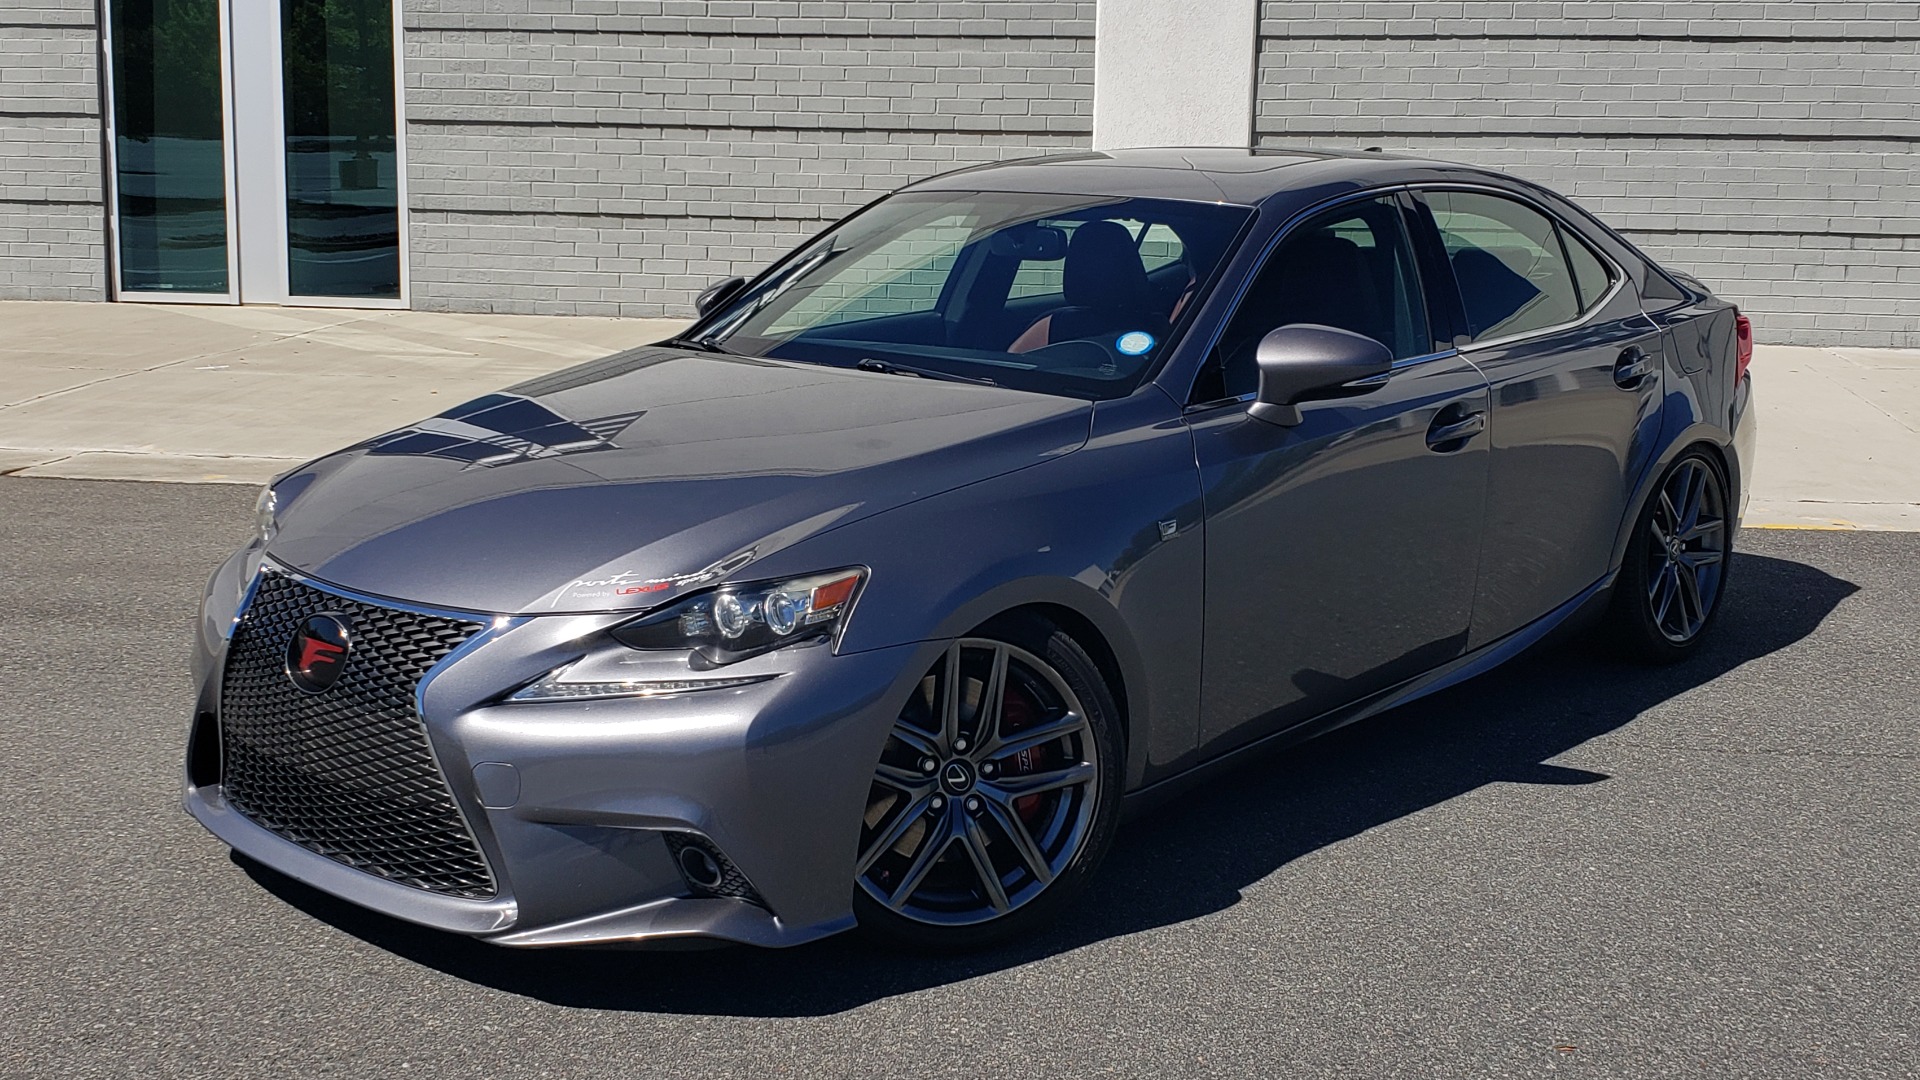 Used 2016 Lexus IS 200T F-SPORT SEDAN / SUNROOF / LCA / HTD & CLD SEATS / REARVIEW for sale Sold at Formula Imports in Charlotte NC 28227 2